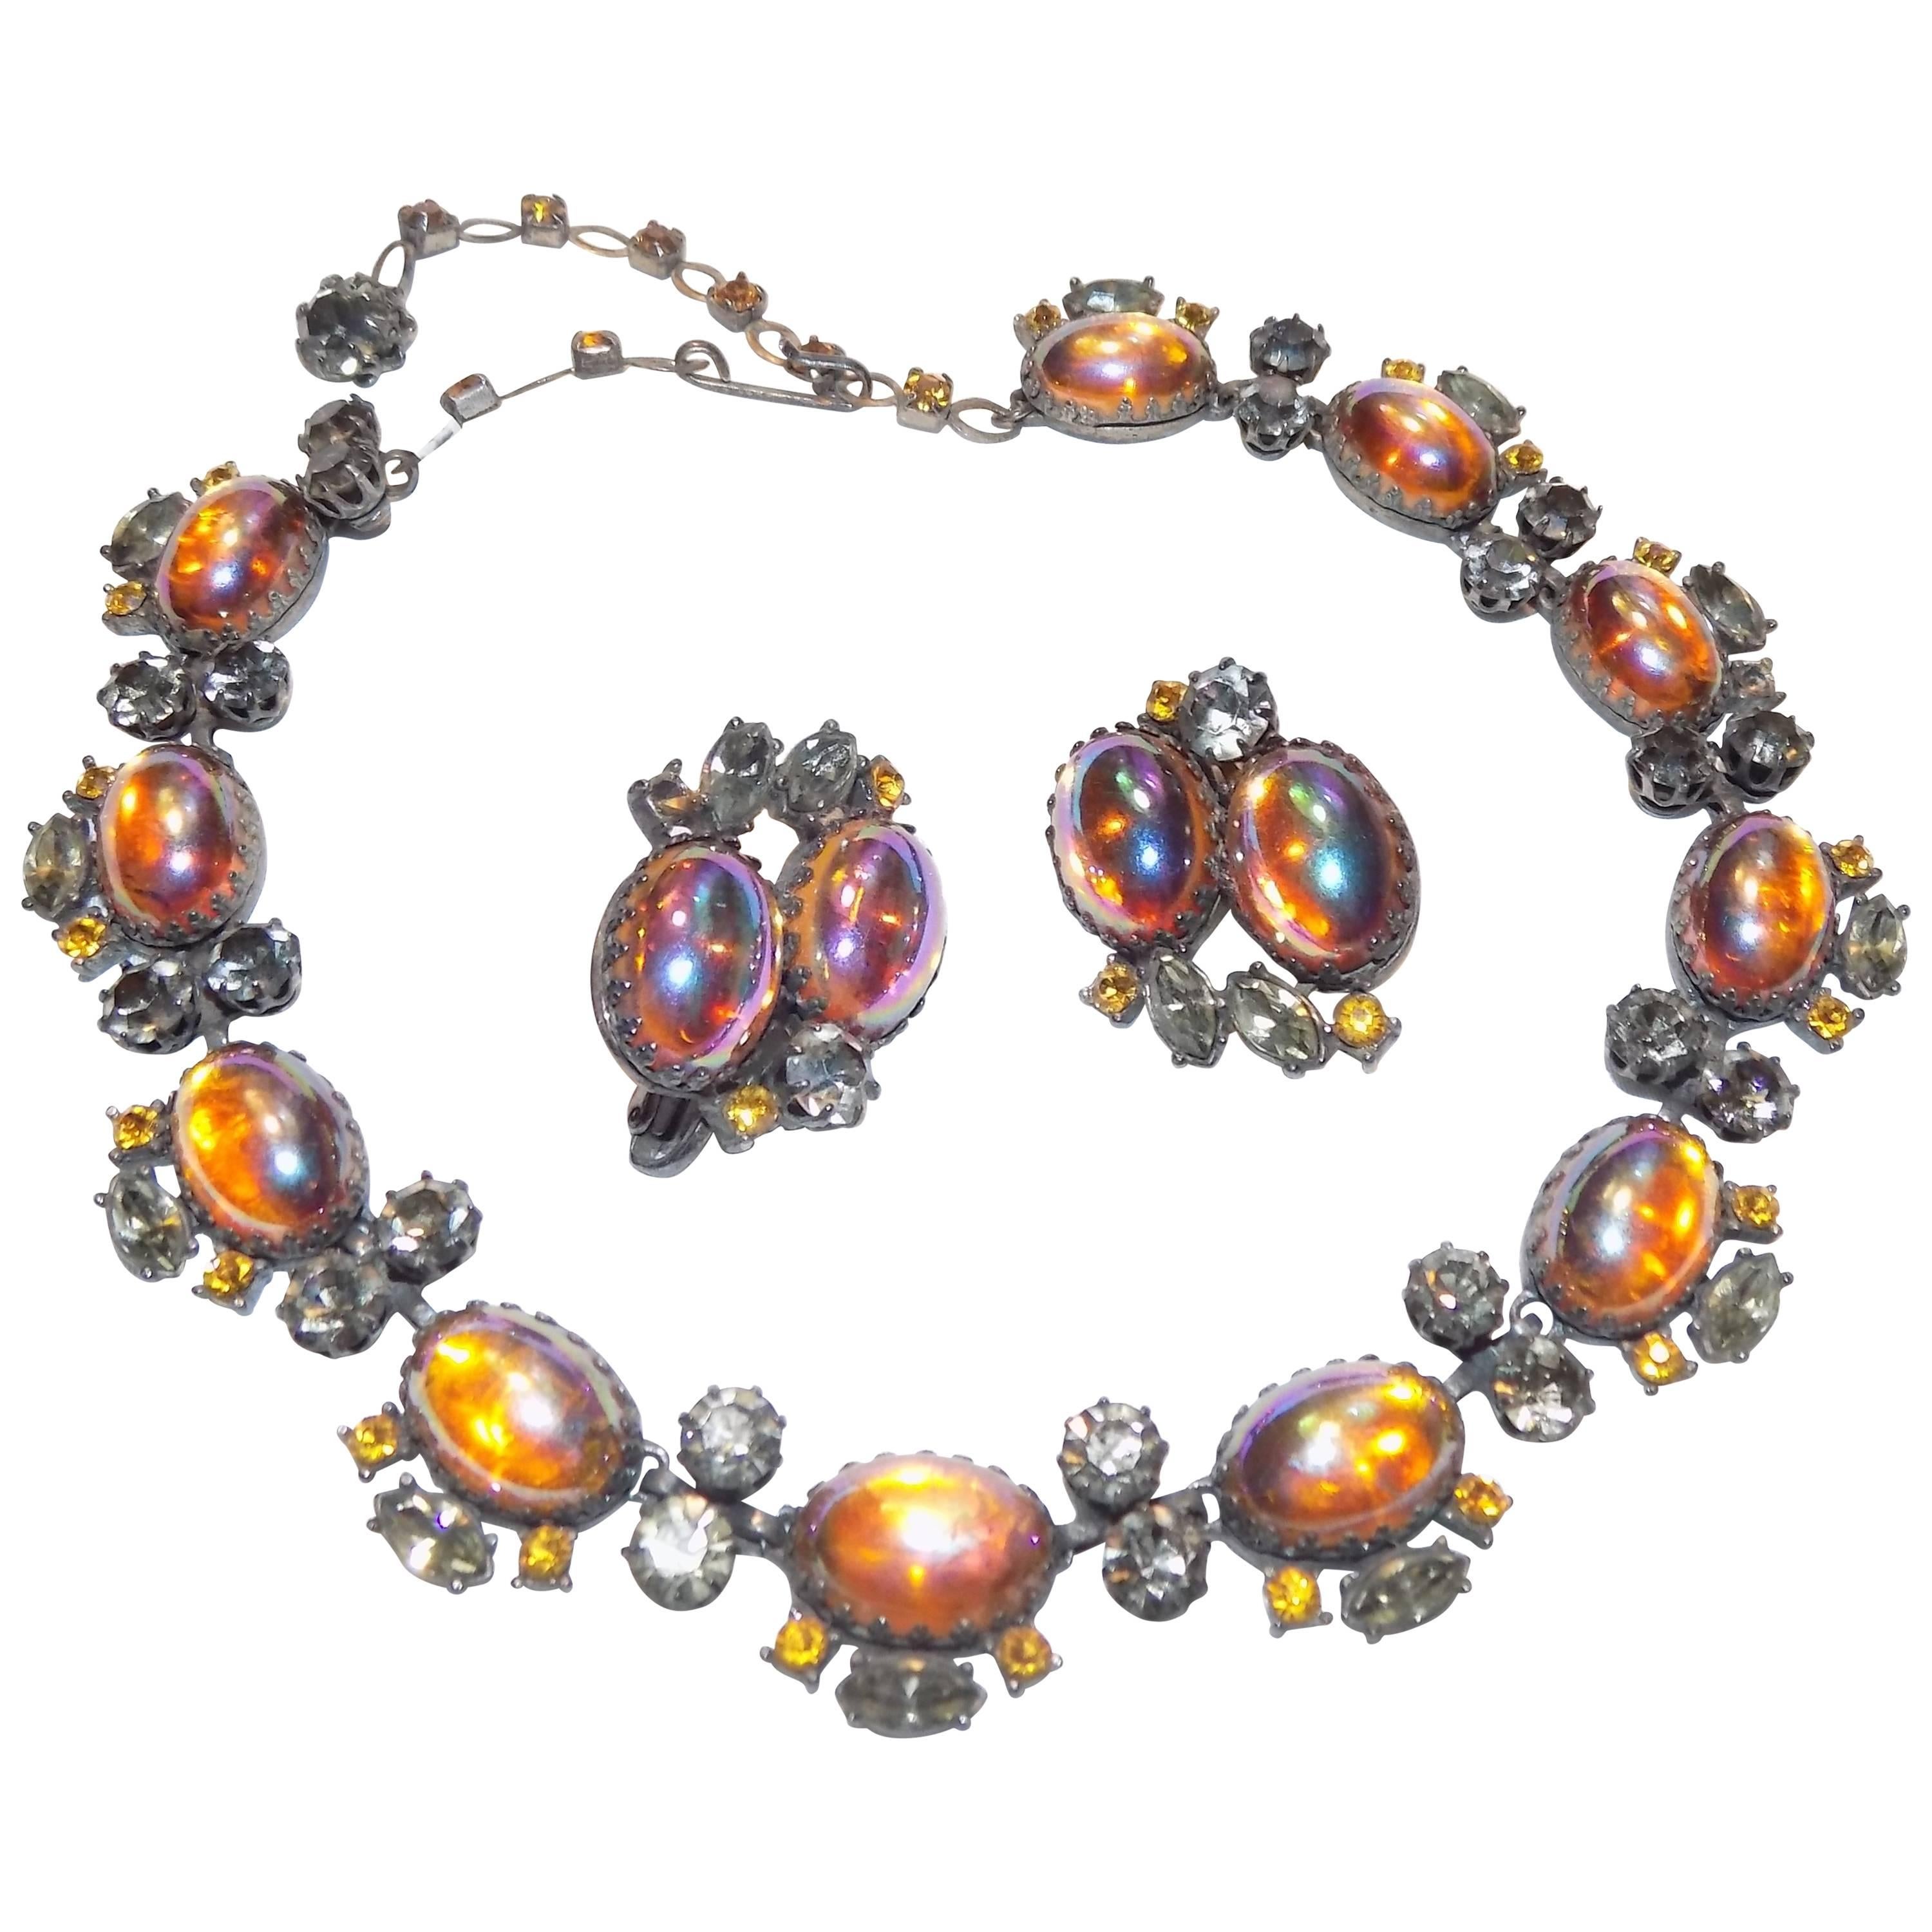 Vandome fire opal  cabochon  choker necklace and earrings set  For Sale